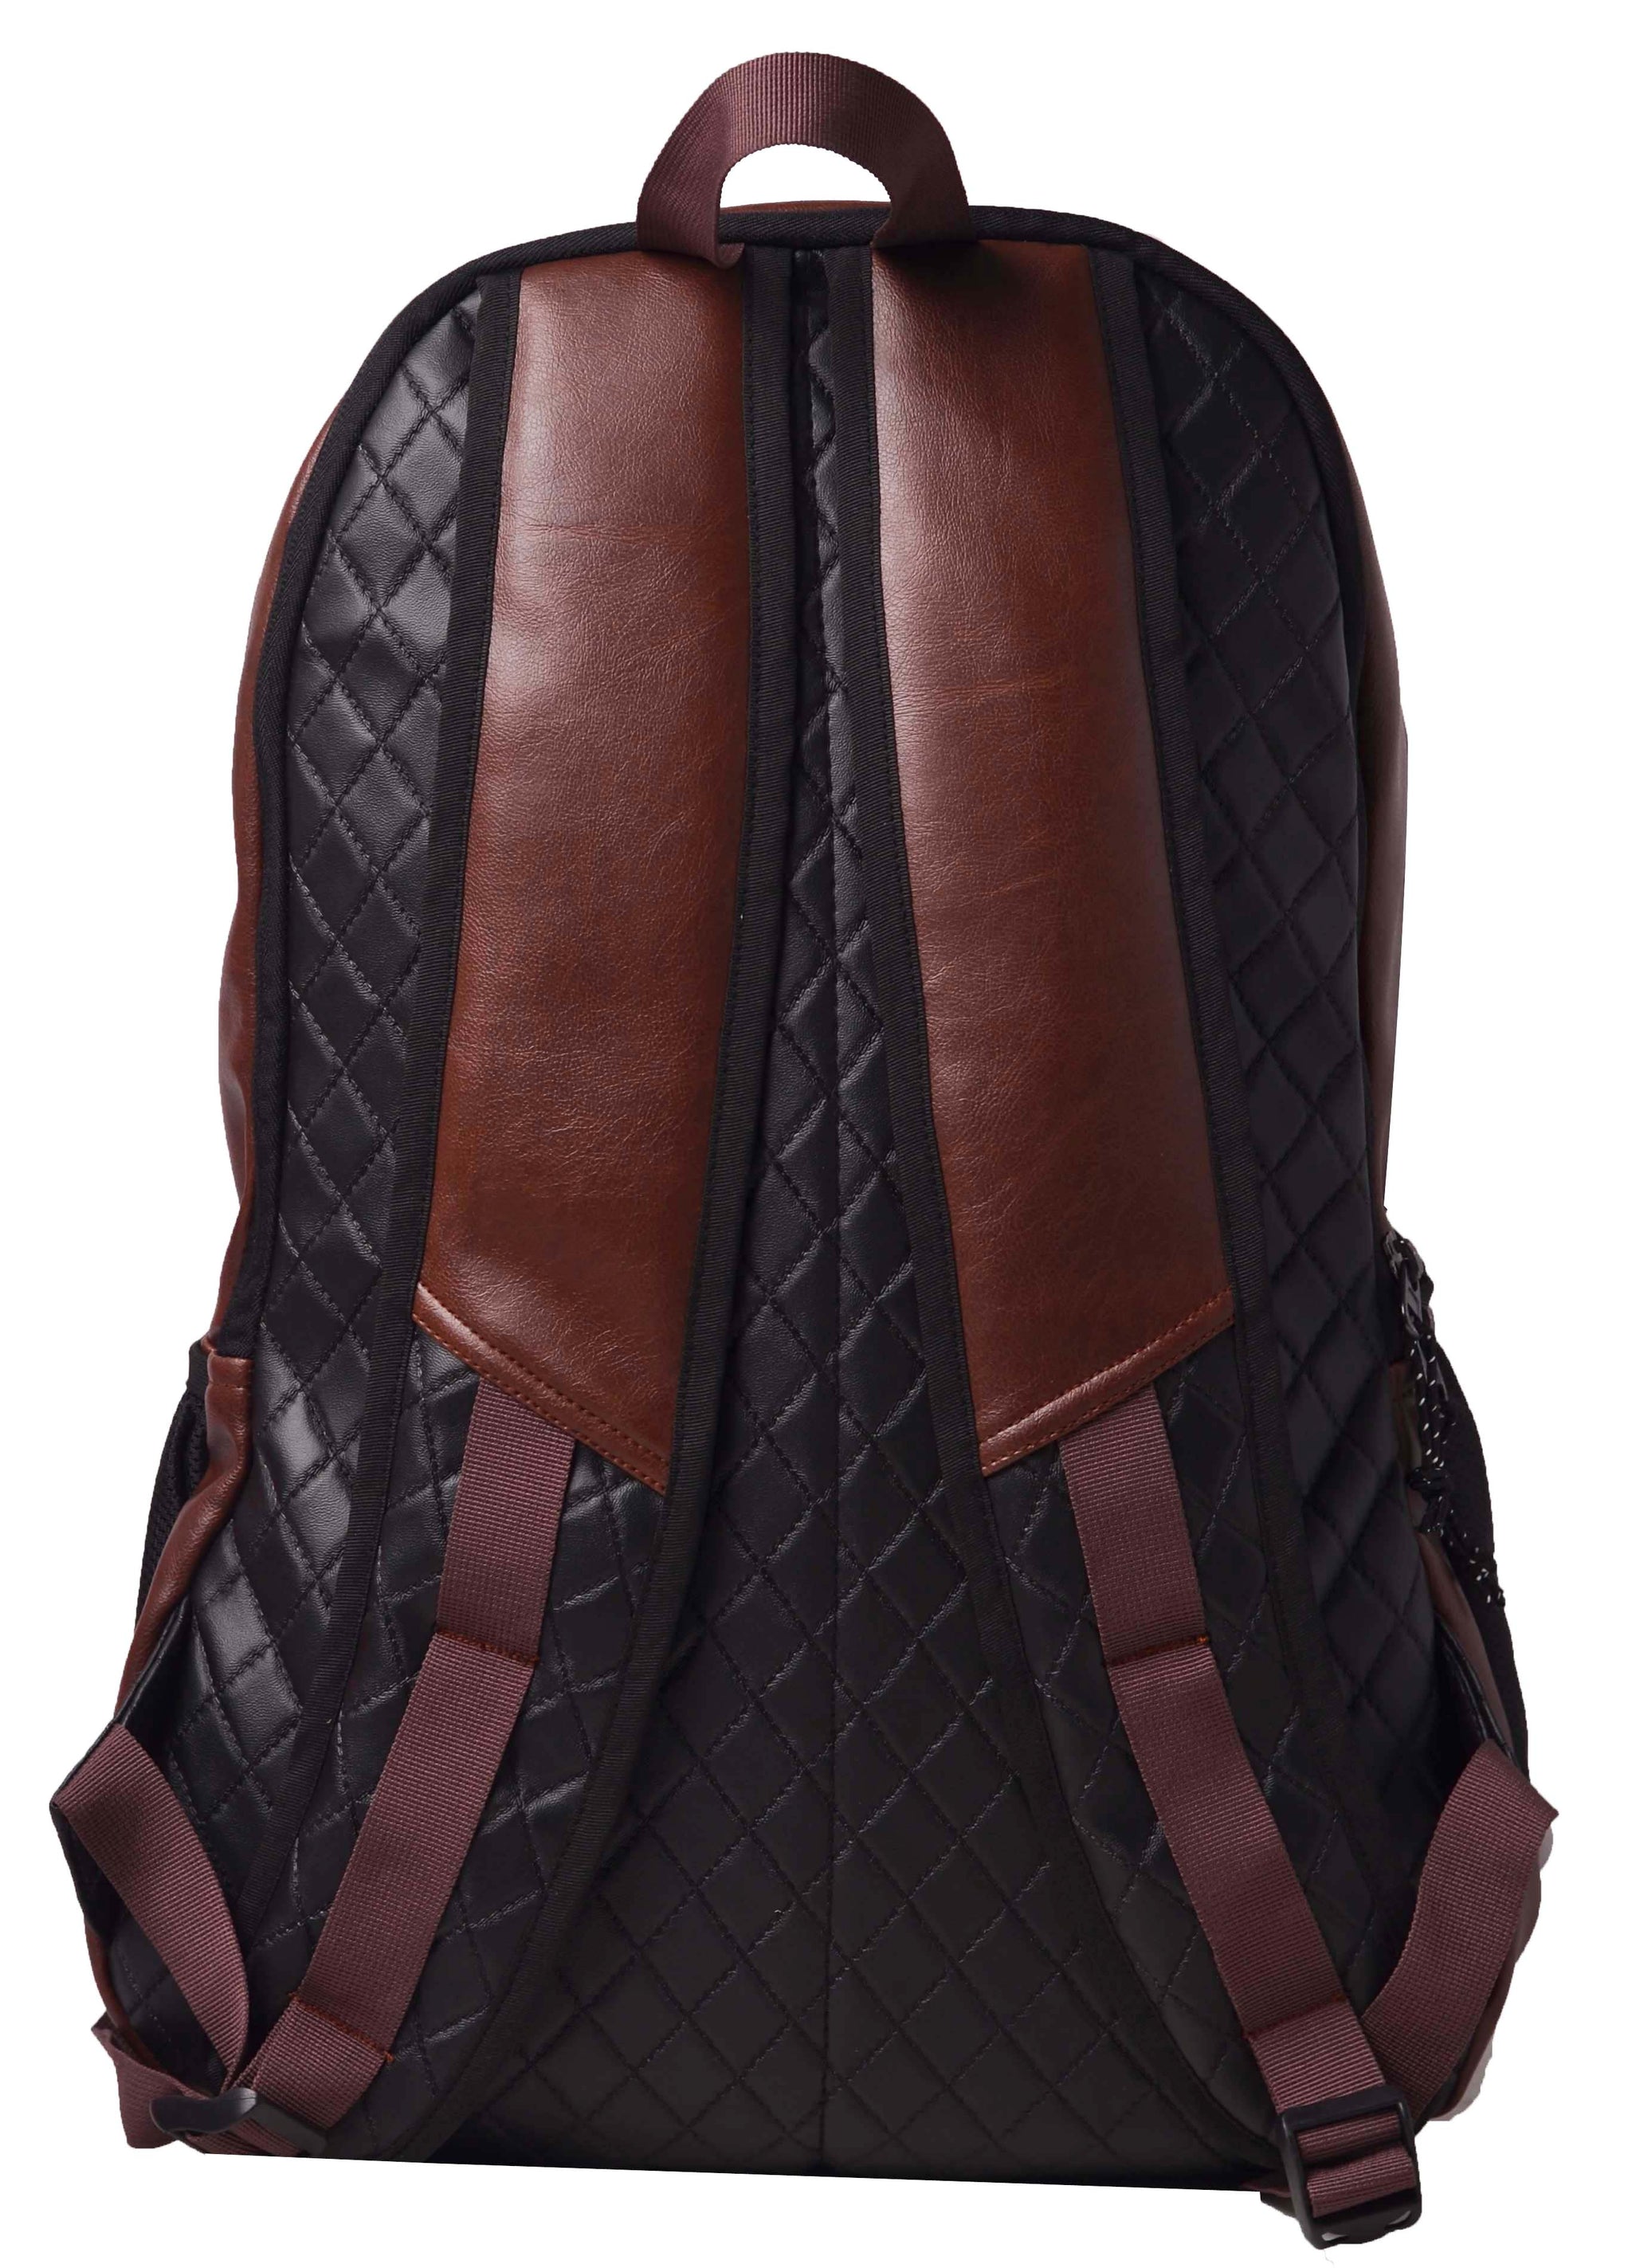 F Gear Tandrum V2 28 Liters Brown Artificial Leather Laptop Backpack (2587)